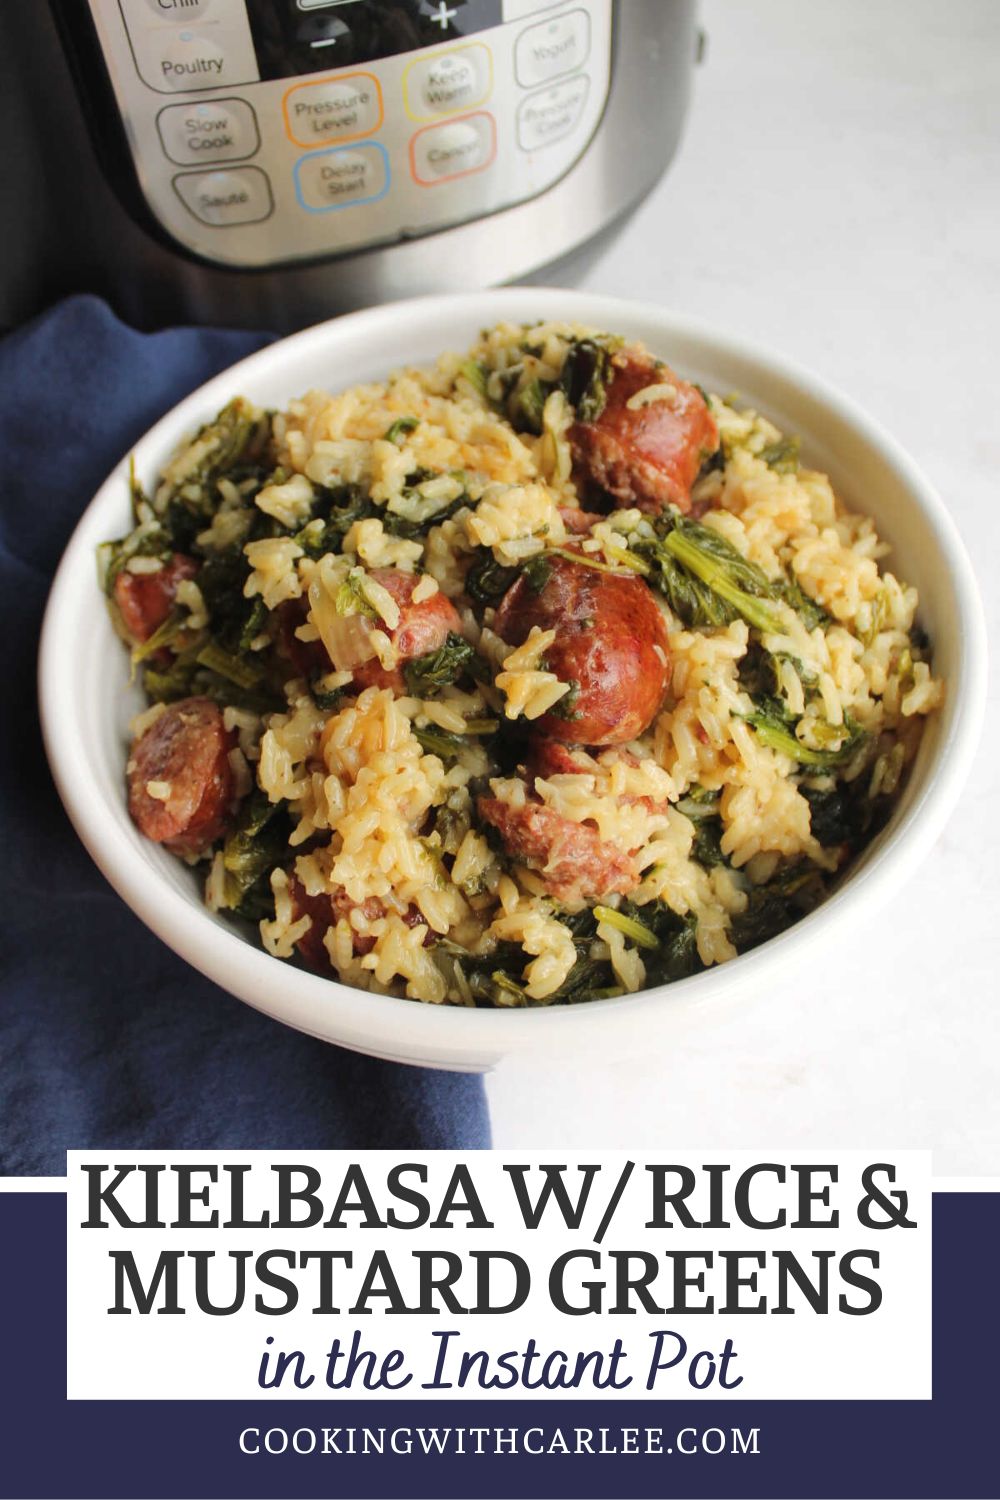 Getting dinner on the table is fast and easy with this great kielbasa with rice and mustard greens recipe. Everything cooks together in a pressure cooker for a flavorful but simple meal.